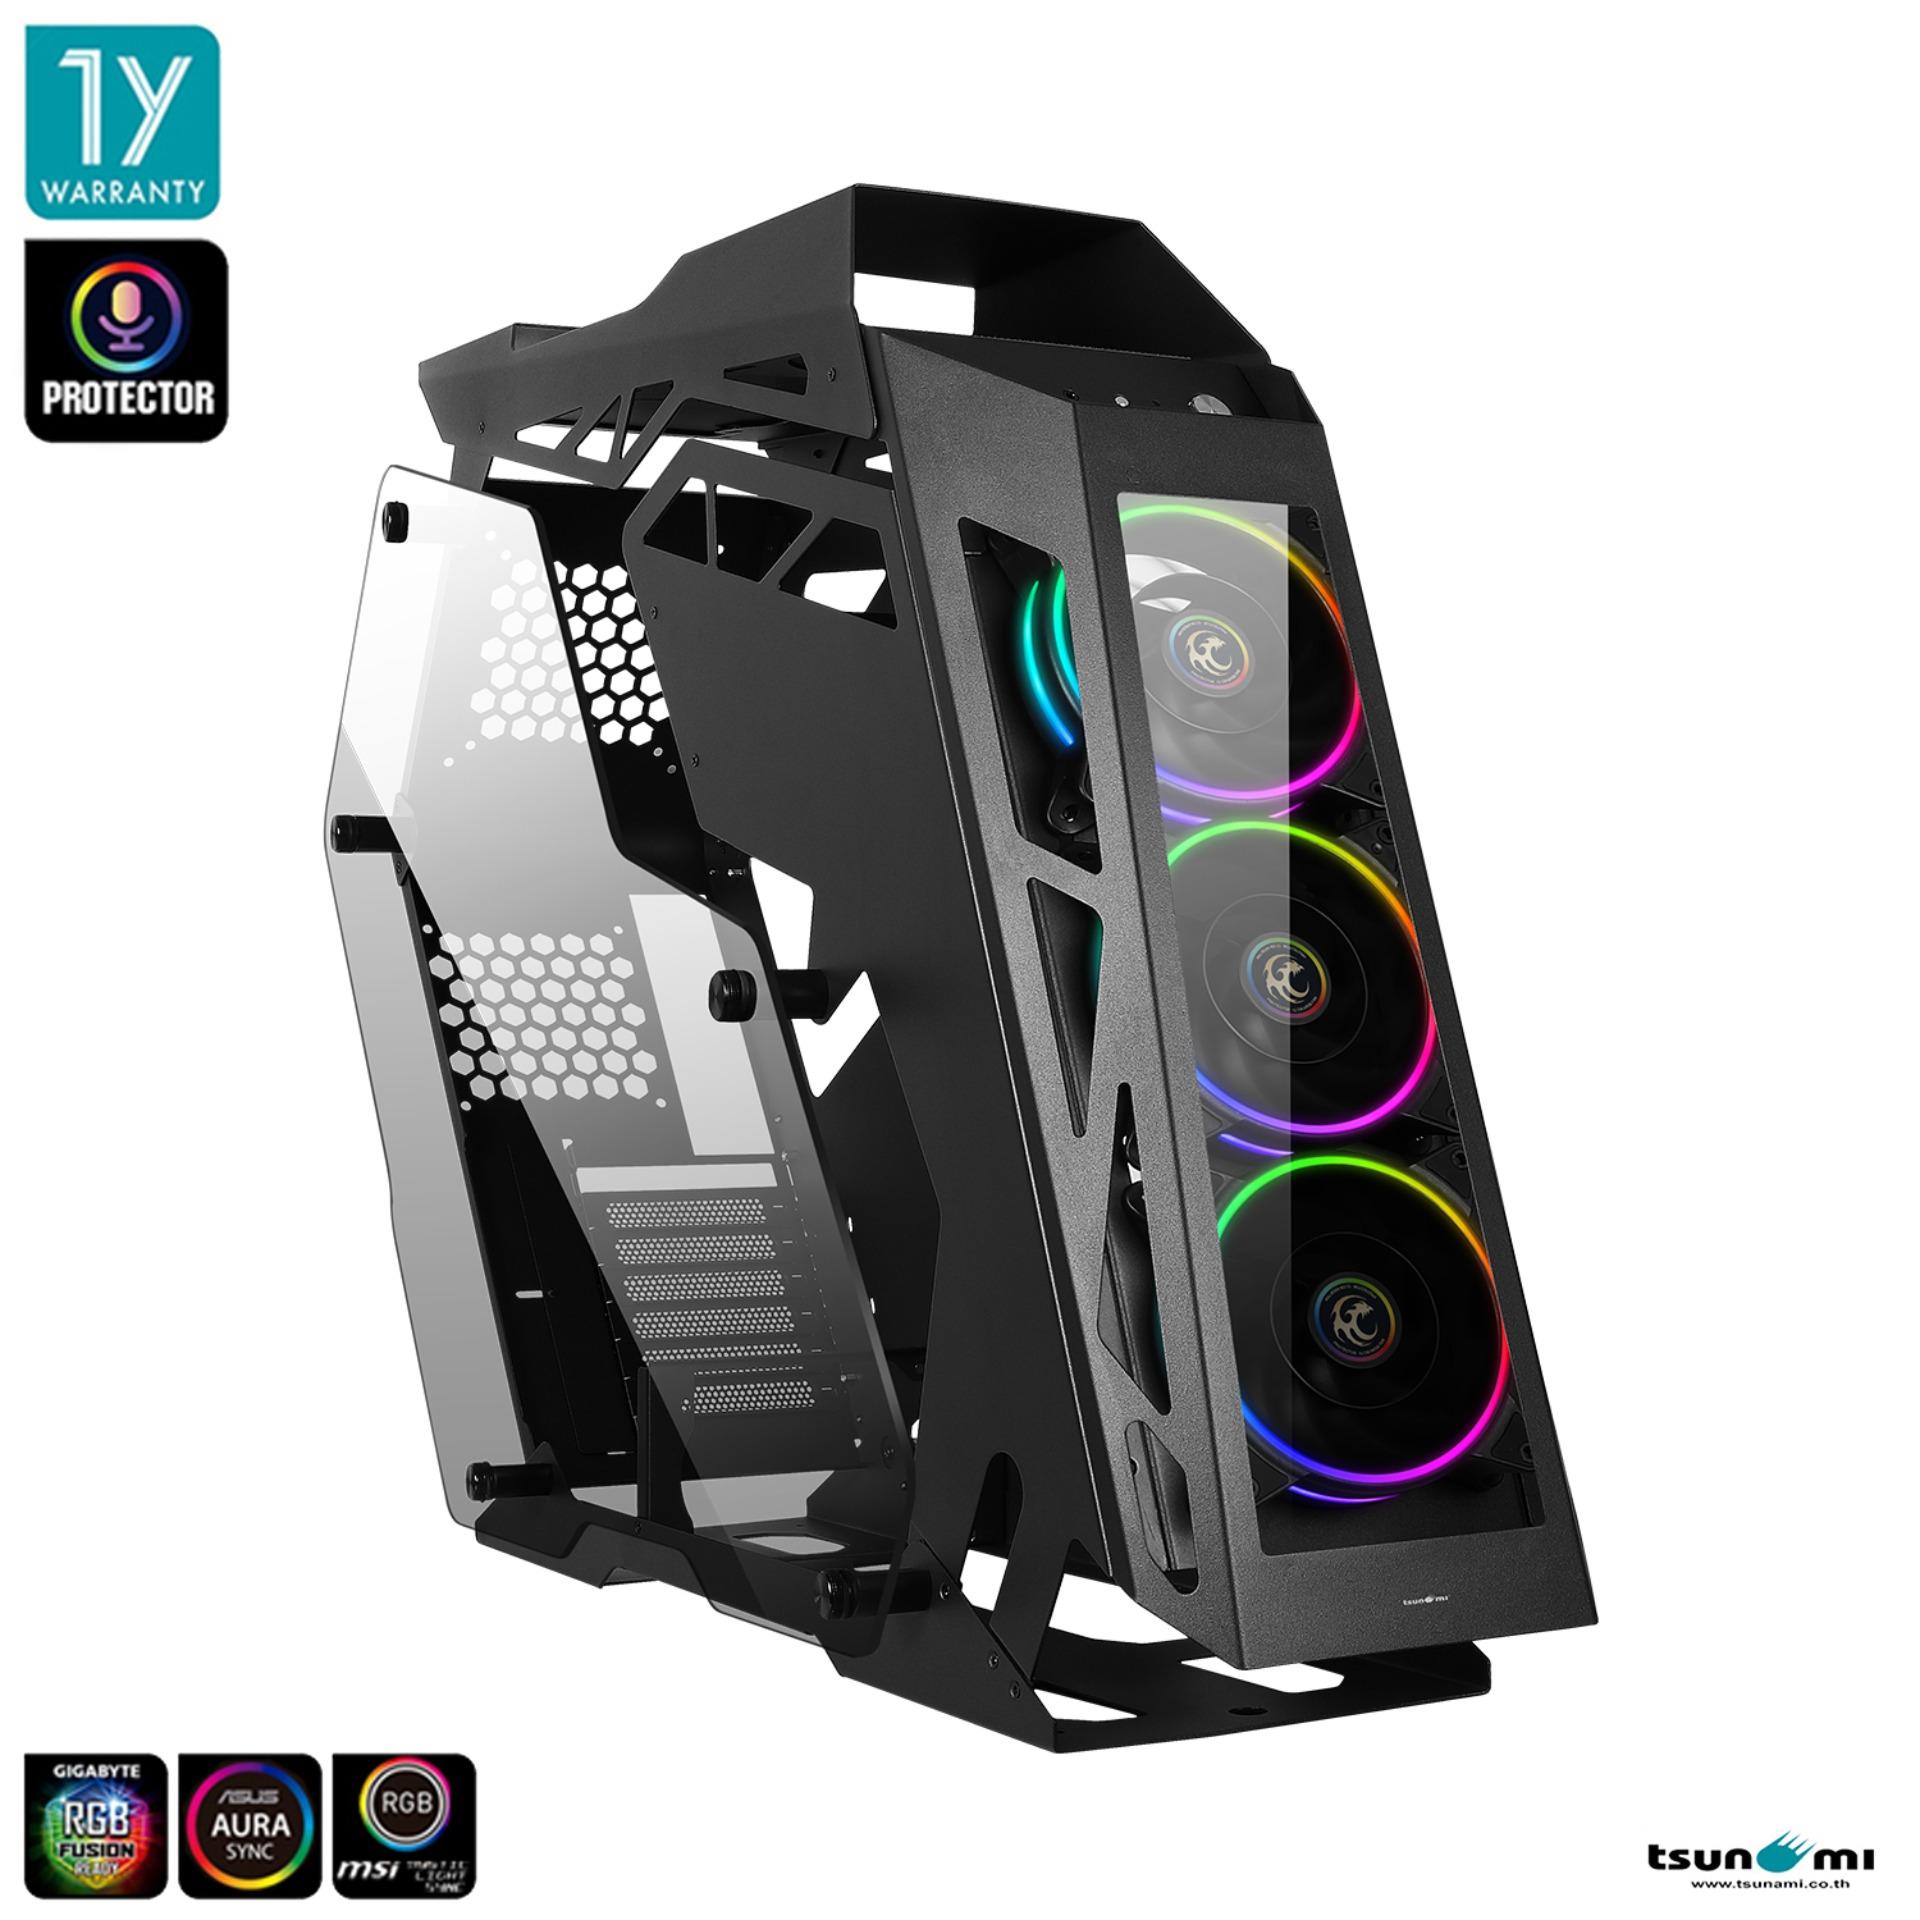 Tsunami (เคส เกมมิ่ง) Protector Titan KK Open Air Surrounded Tempered Glass Mutant ATX Gaming Computer Case with Protector 1250K Cooling Fan with Hub (ARGB/Protector RGB Ready)